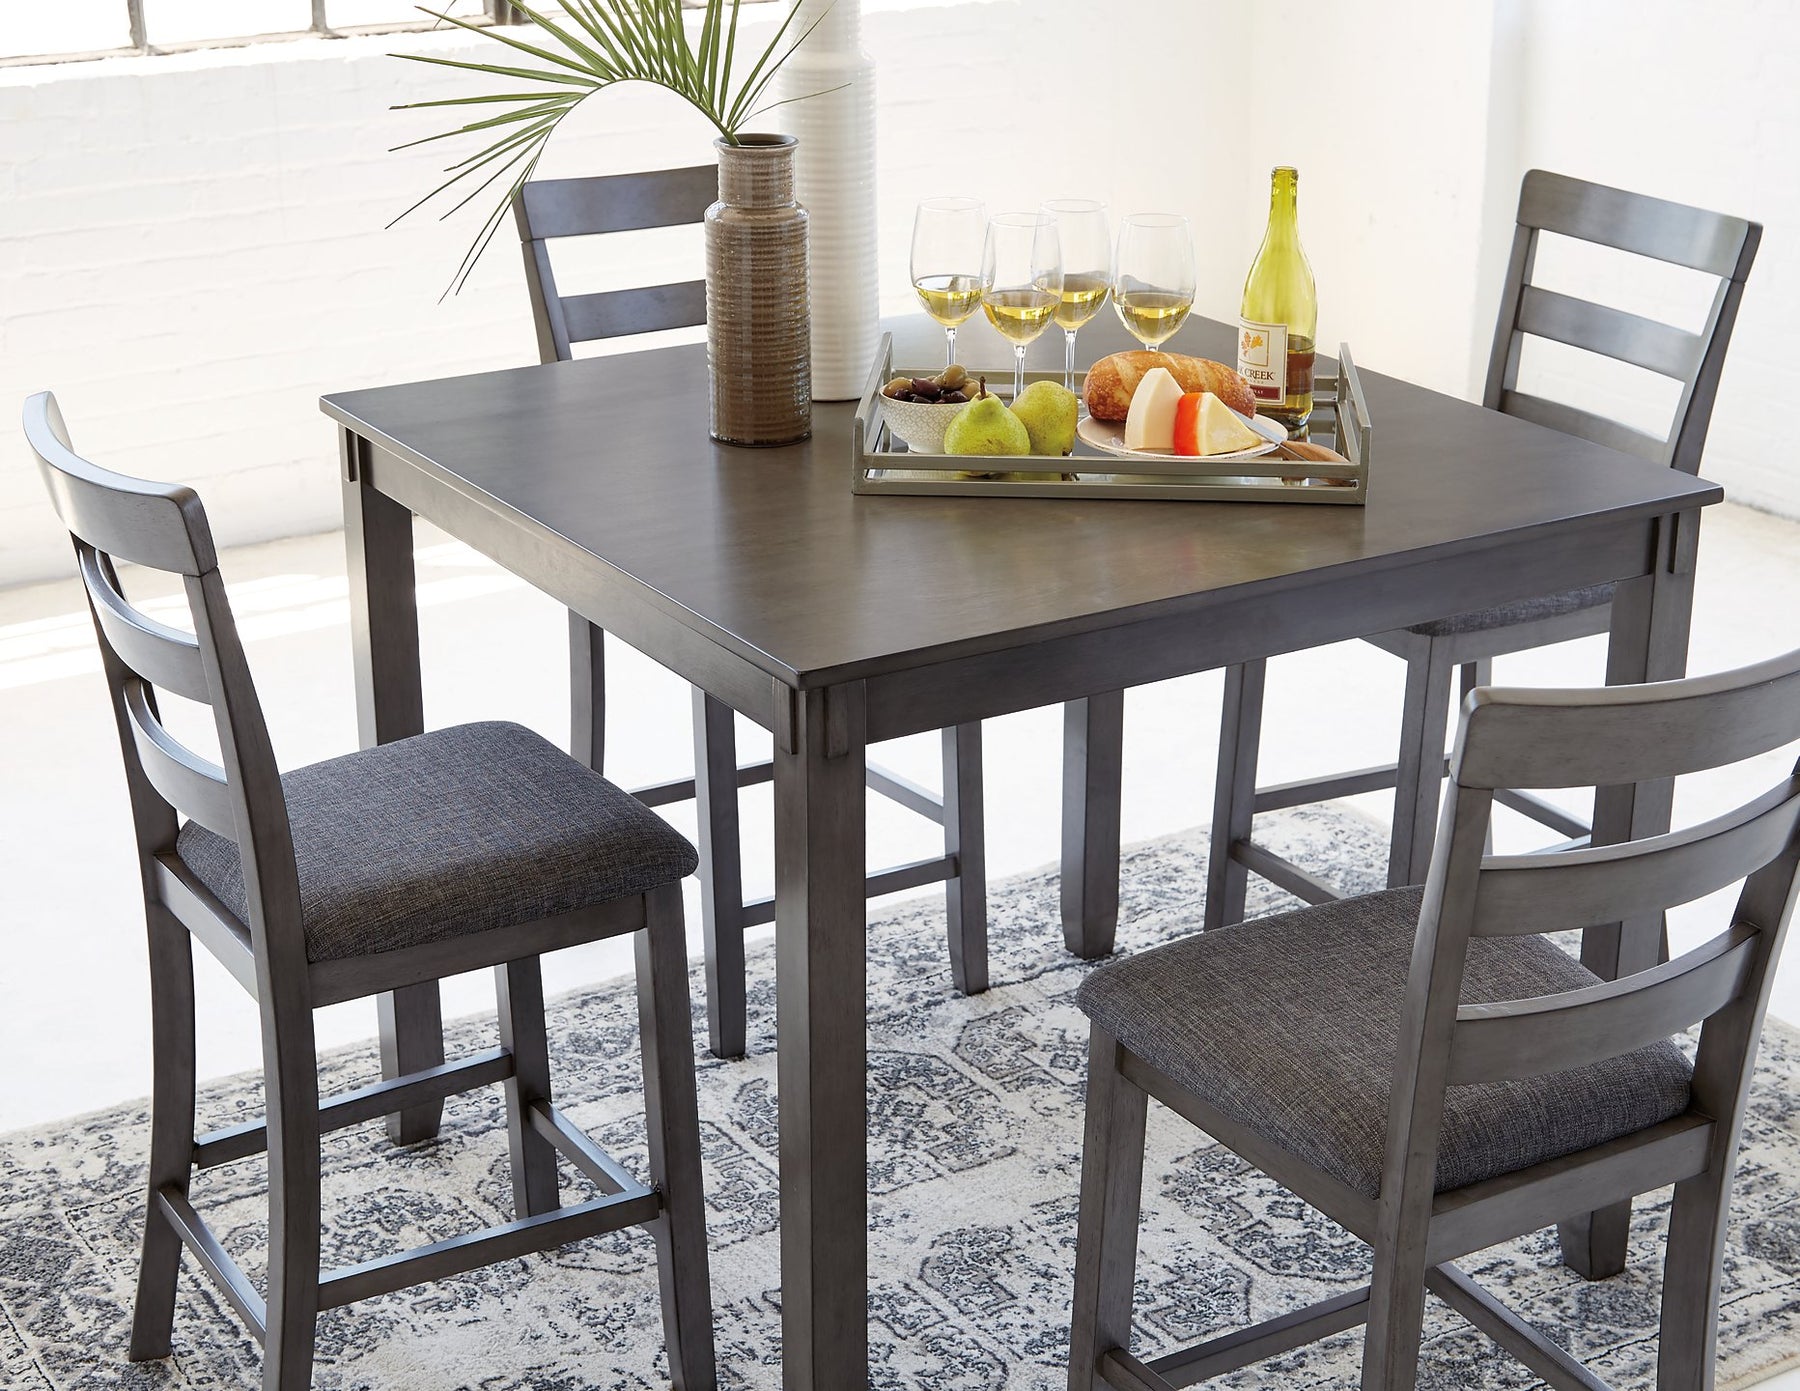 Bridson Counter Height Dining Table and Bar Stools (Set of 5) - Half Price Furniture